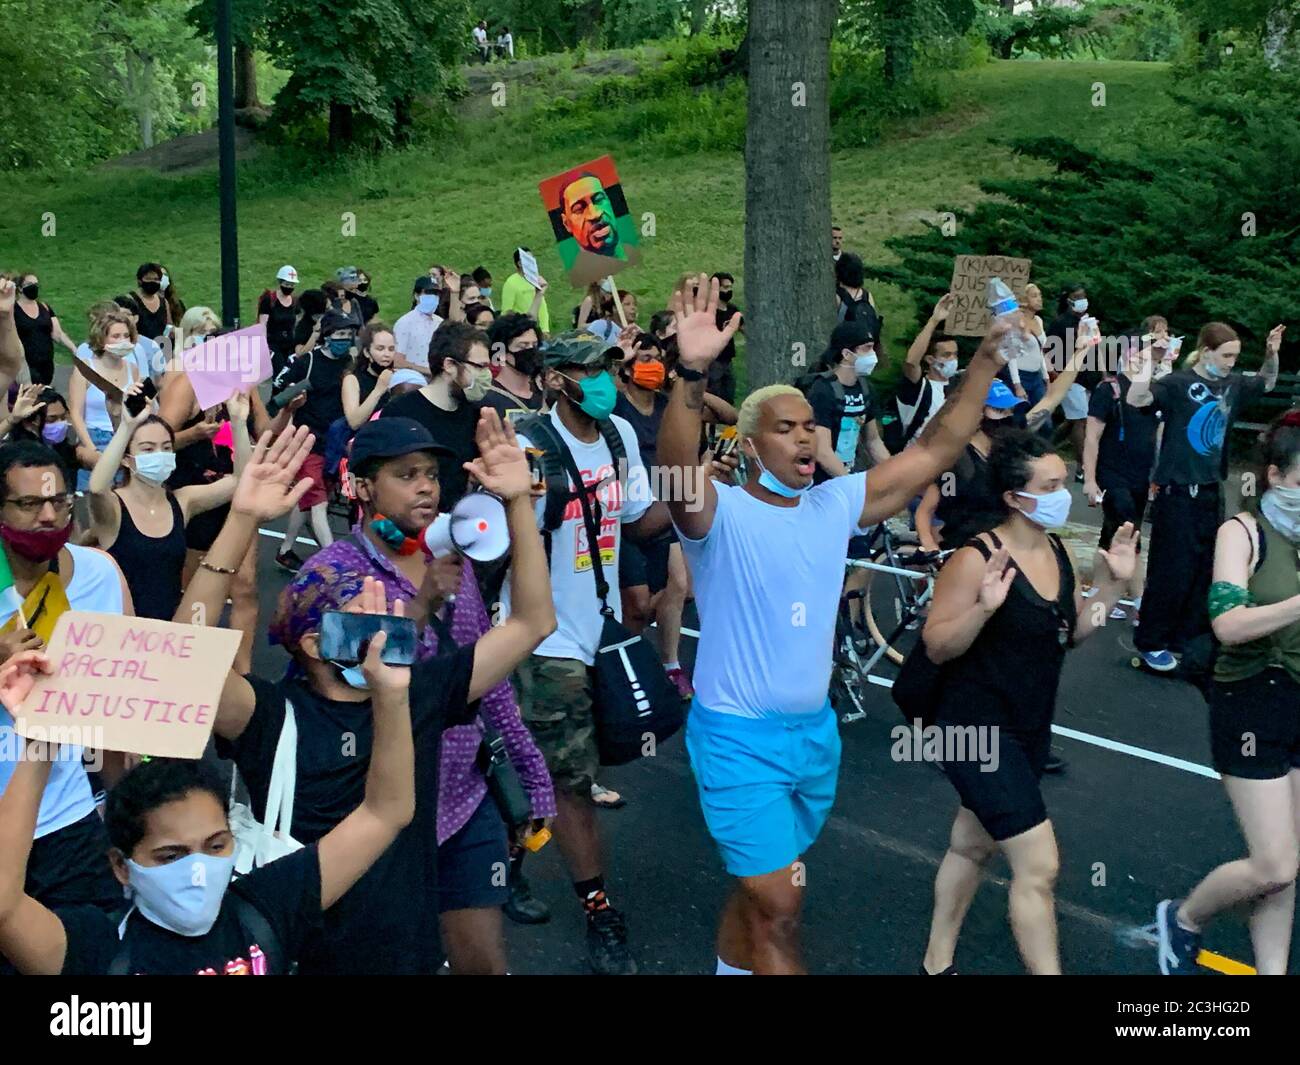 June 19, 2020, New York, New York, USA: (NEW) Black lives matter protest on Juneteenth Holiday at Central Park. June 19, 2020, Manhattan, New York, USA: A big number of Black lives Matter protesters march inside Central Park this Juneteenth holiday to demand justice for the killing of black man George Floyd and against police brutality. Juneteenth is now a holiday  celebrating the liberation of slaves in the United States. It started in Texas and it is now celebrated annually on the 19th of June all over the USA. Credit : Niyi Fote /Thenews2  (Credit Image: © Niyi Fote/TheNEWS2 via ZUMA Wire) Stock Photo